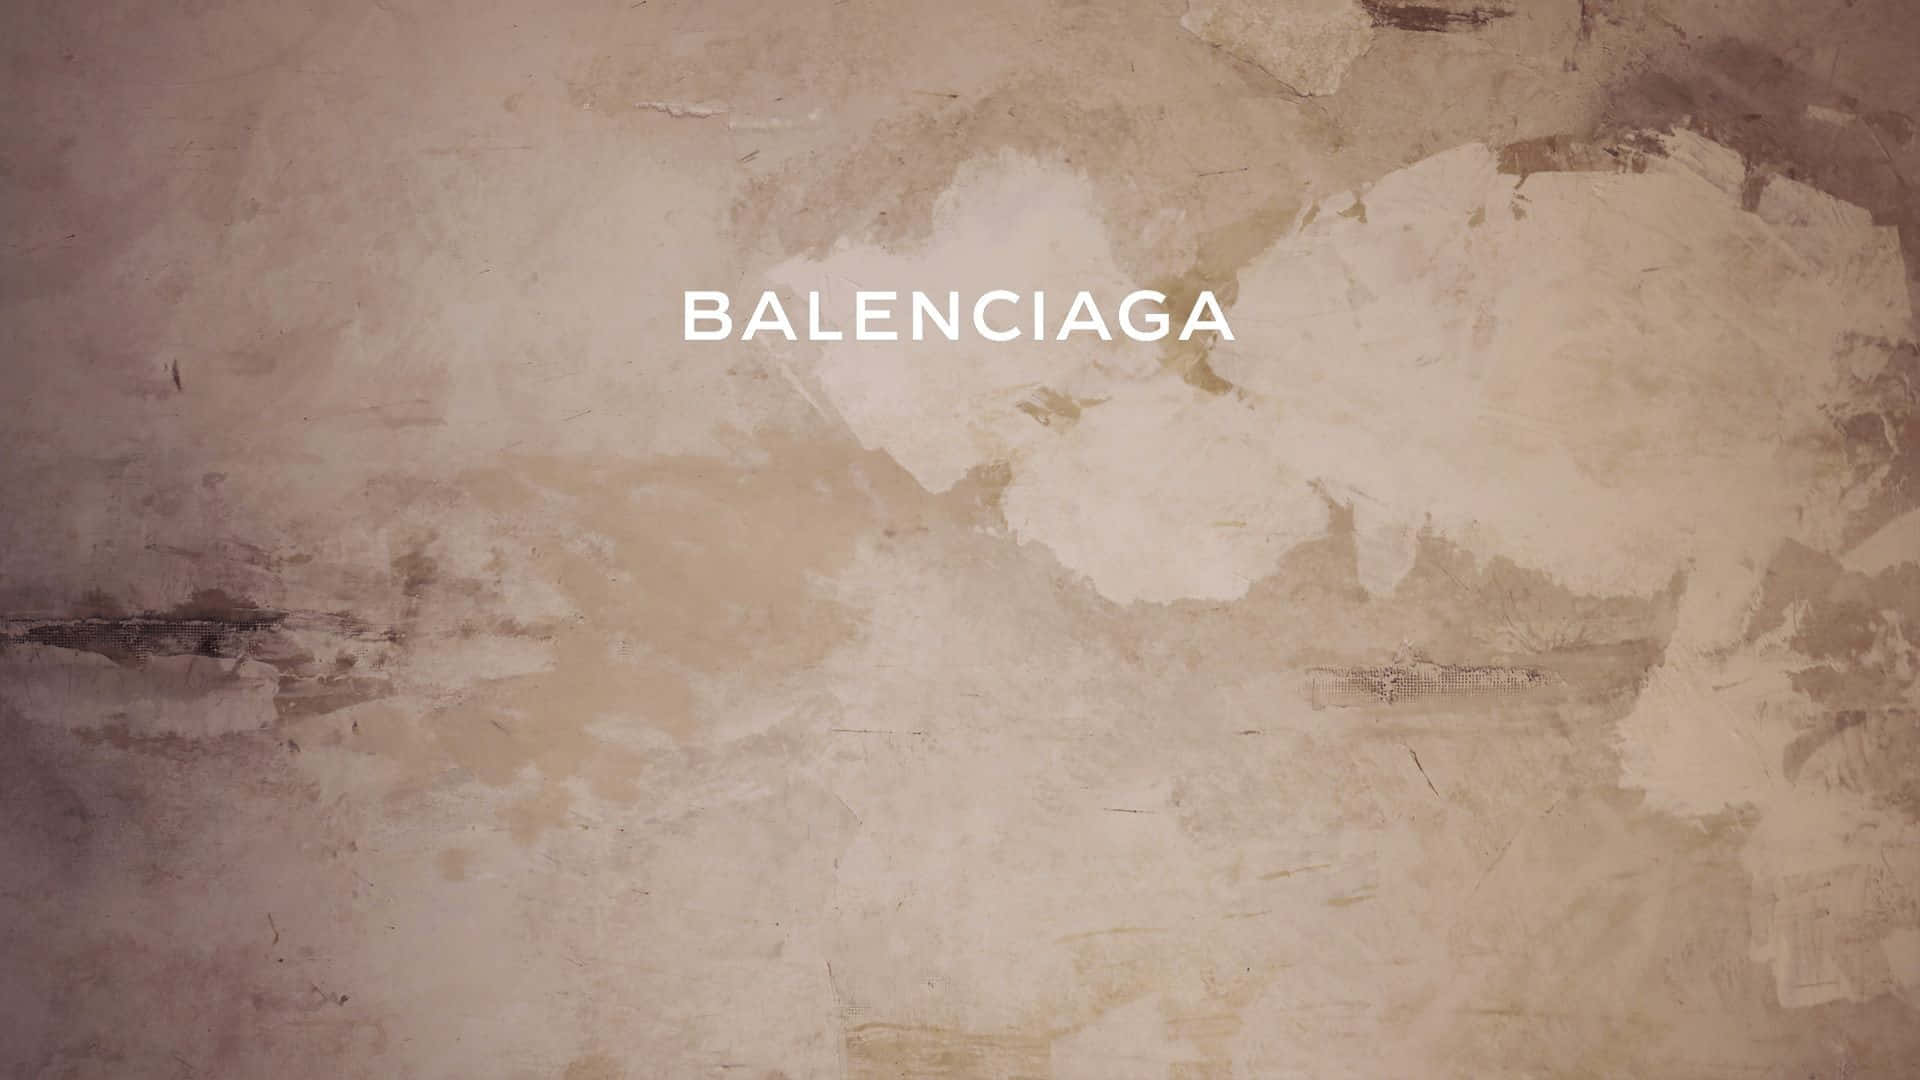 Step up your style game with Balenciaga's stylish accessories